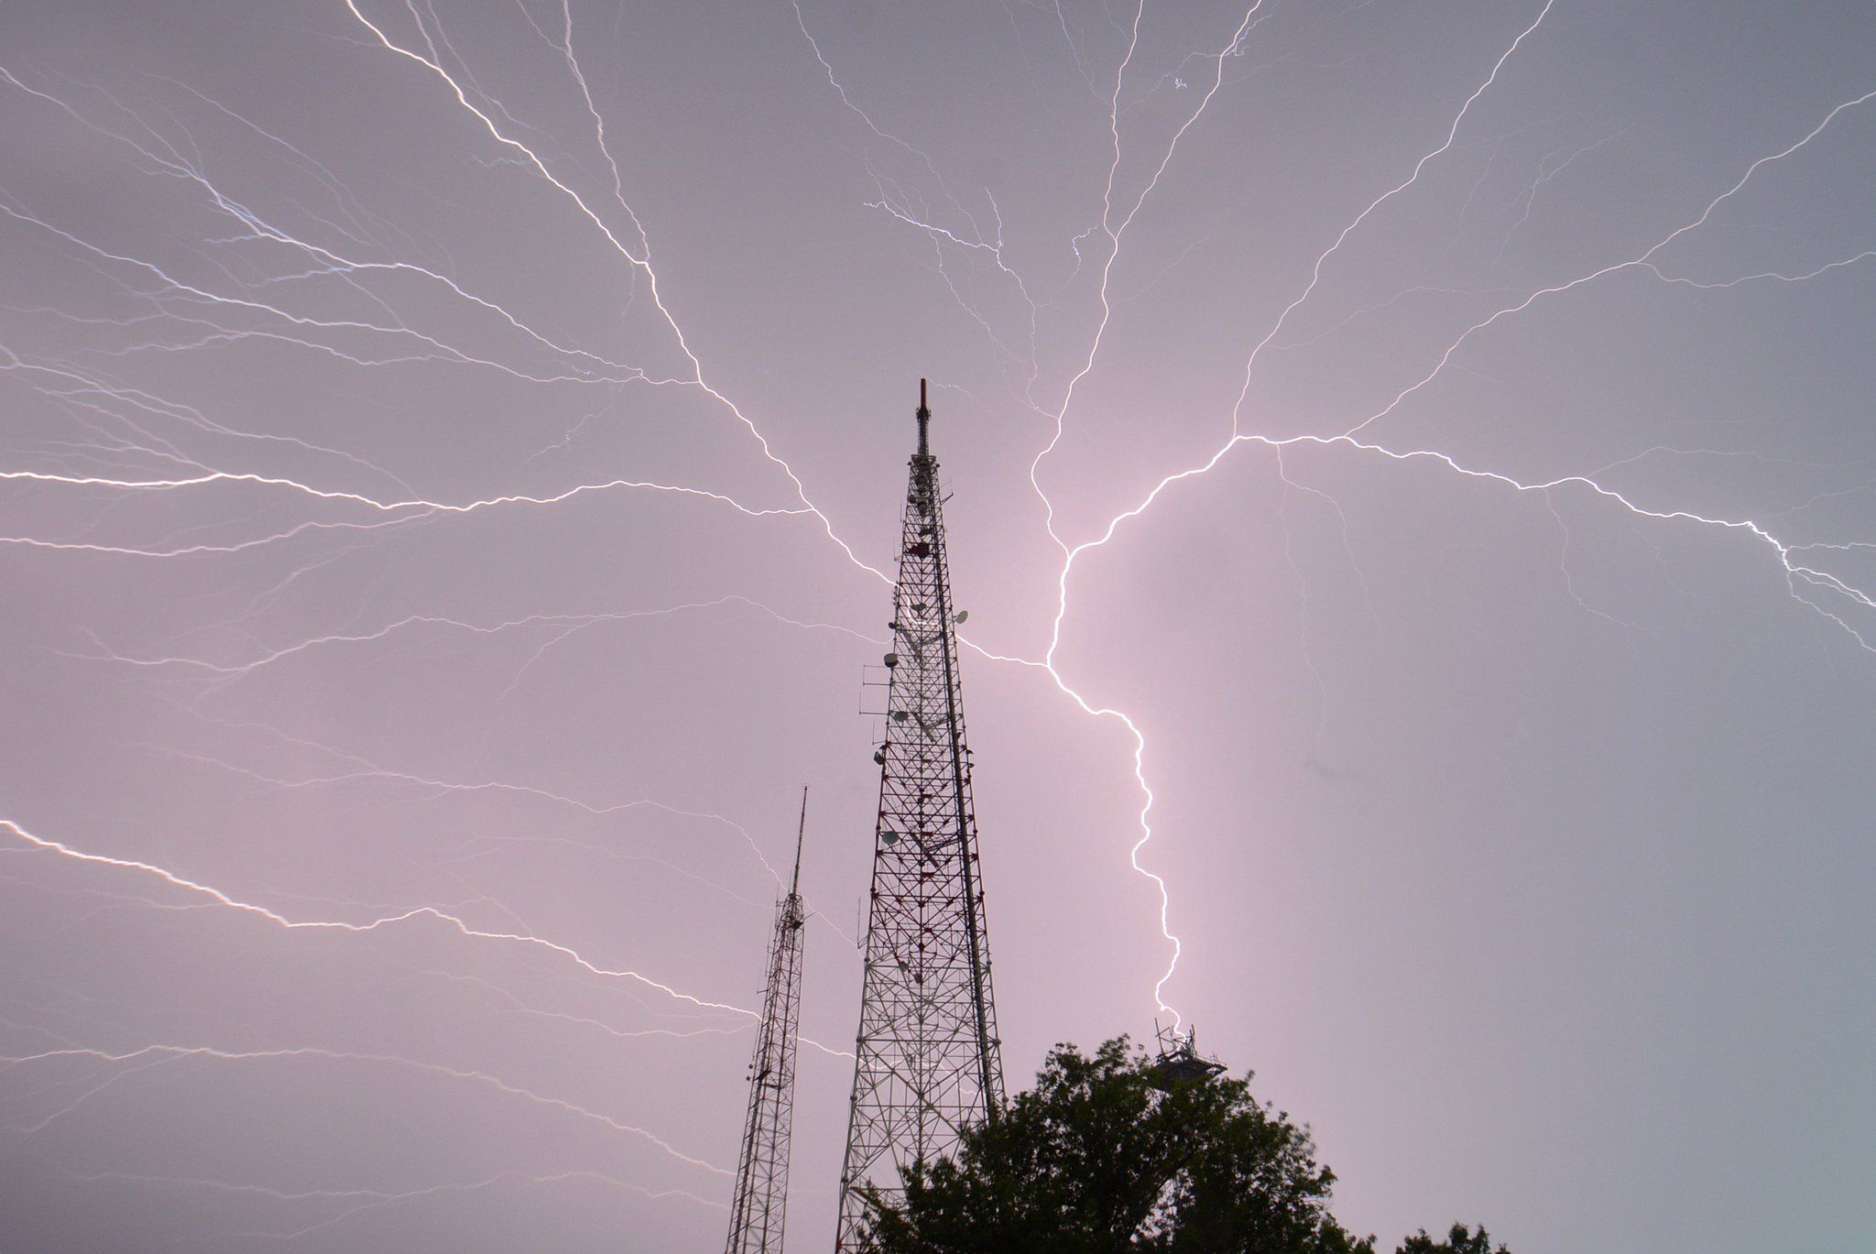 Lightning flickers across the sky above Tenleytown on May 18, 2017. (WTOP/Dave Dildine)